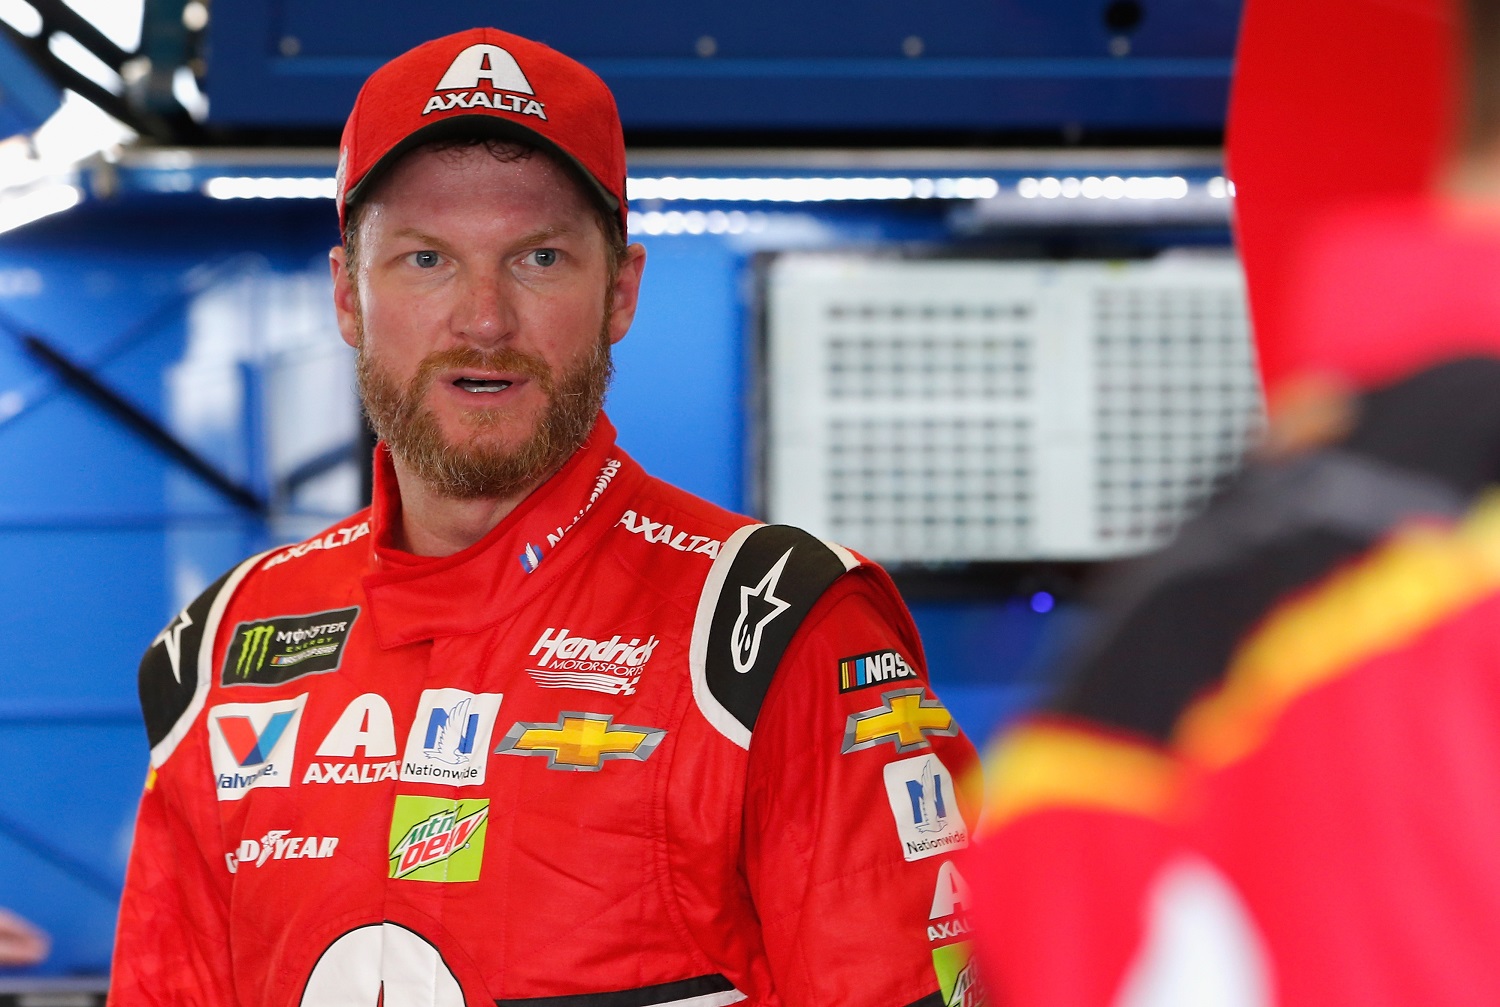 Dale Earnhardt Jr. stands in the garage area during practice for the Monster Energy NASCAR Cup Series Championship Ford EcoBoost 400 at Homestead-Miami Speedway on Nov. 18, 2017.